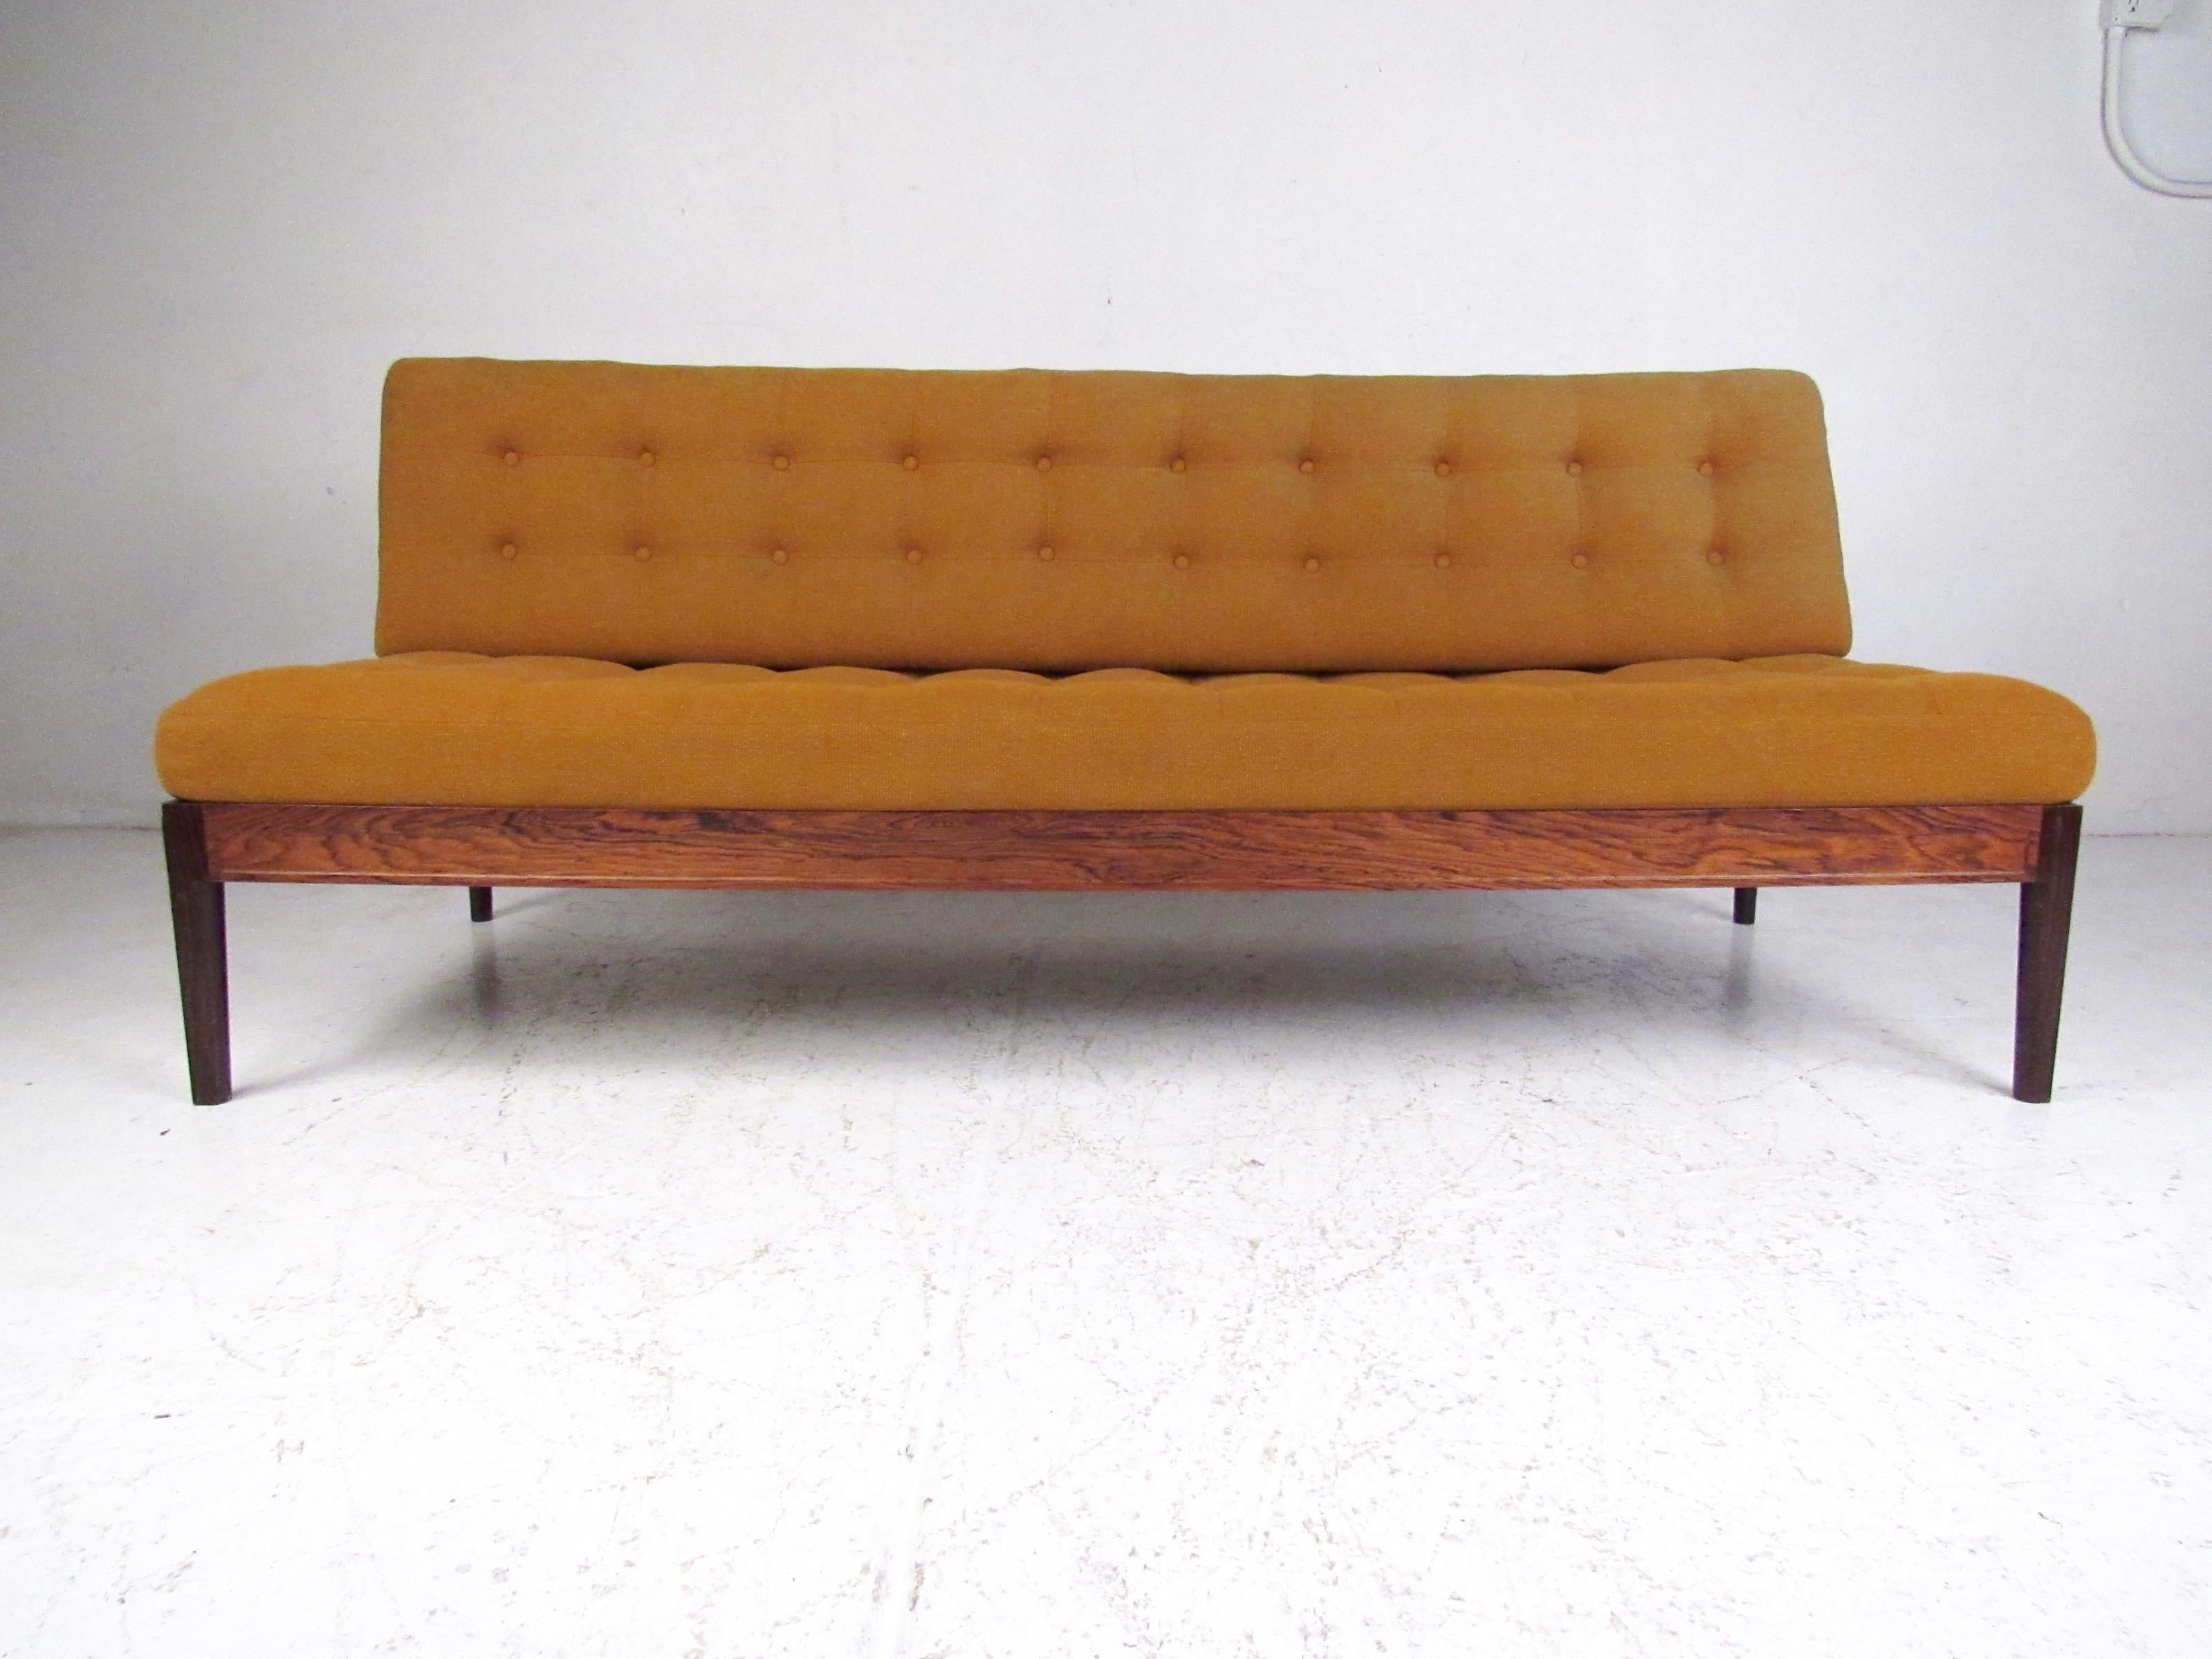 This stunning Mid-Century Modern sofa or daybed features rich rosewood finish, aluminum trim, vintage tufted upholstery, and impressive Scandinavian craftsmanship. With removable wedge seat back the sofa can be easily used as an office daybed for